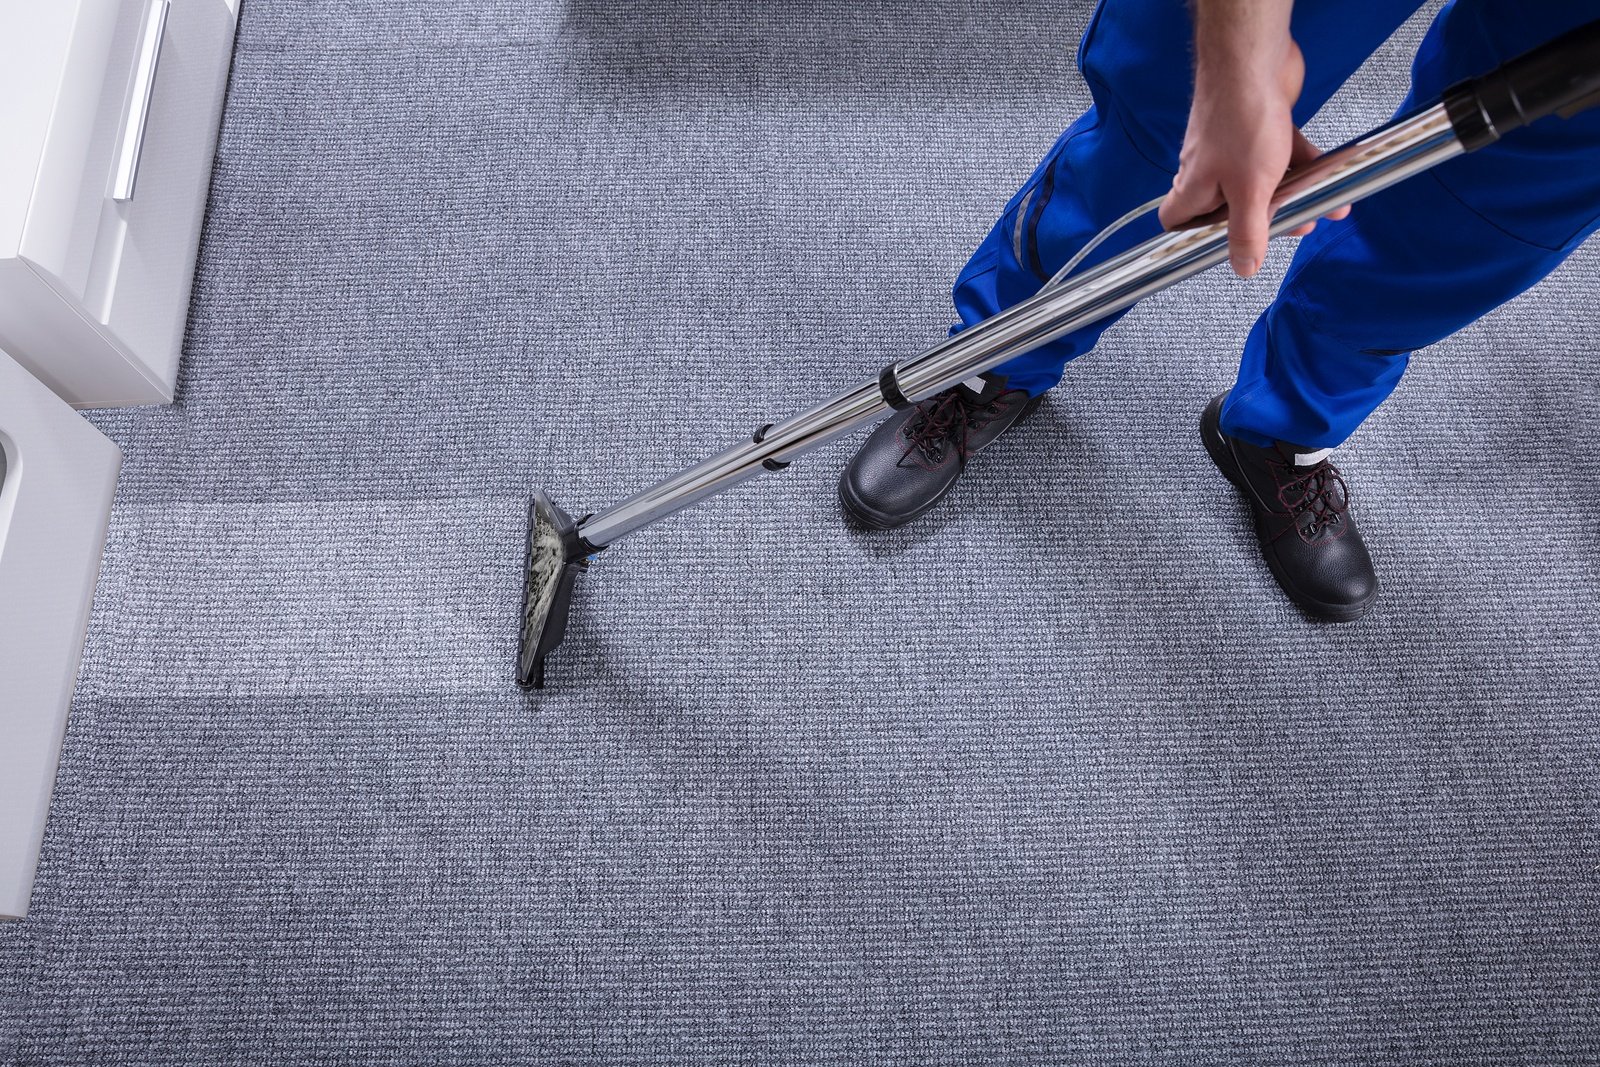 Things You Must Check That Can Damage Your Valuable Carpets